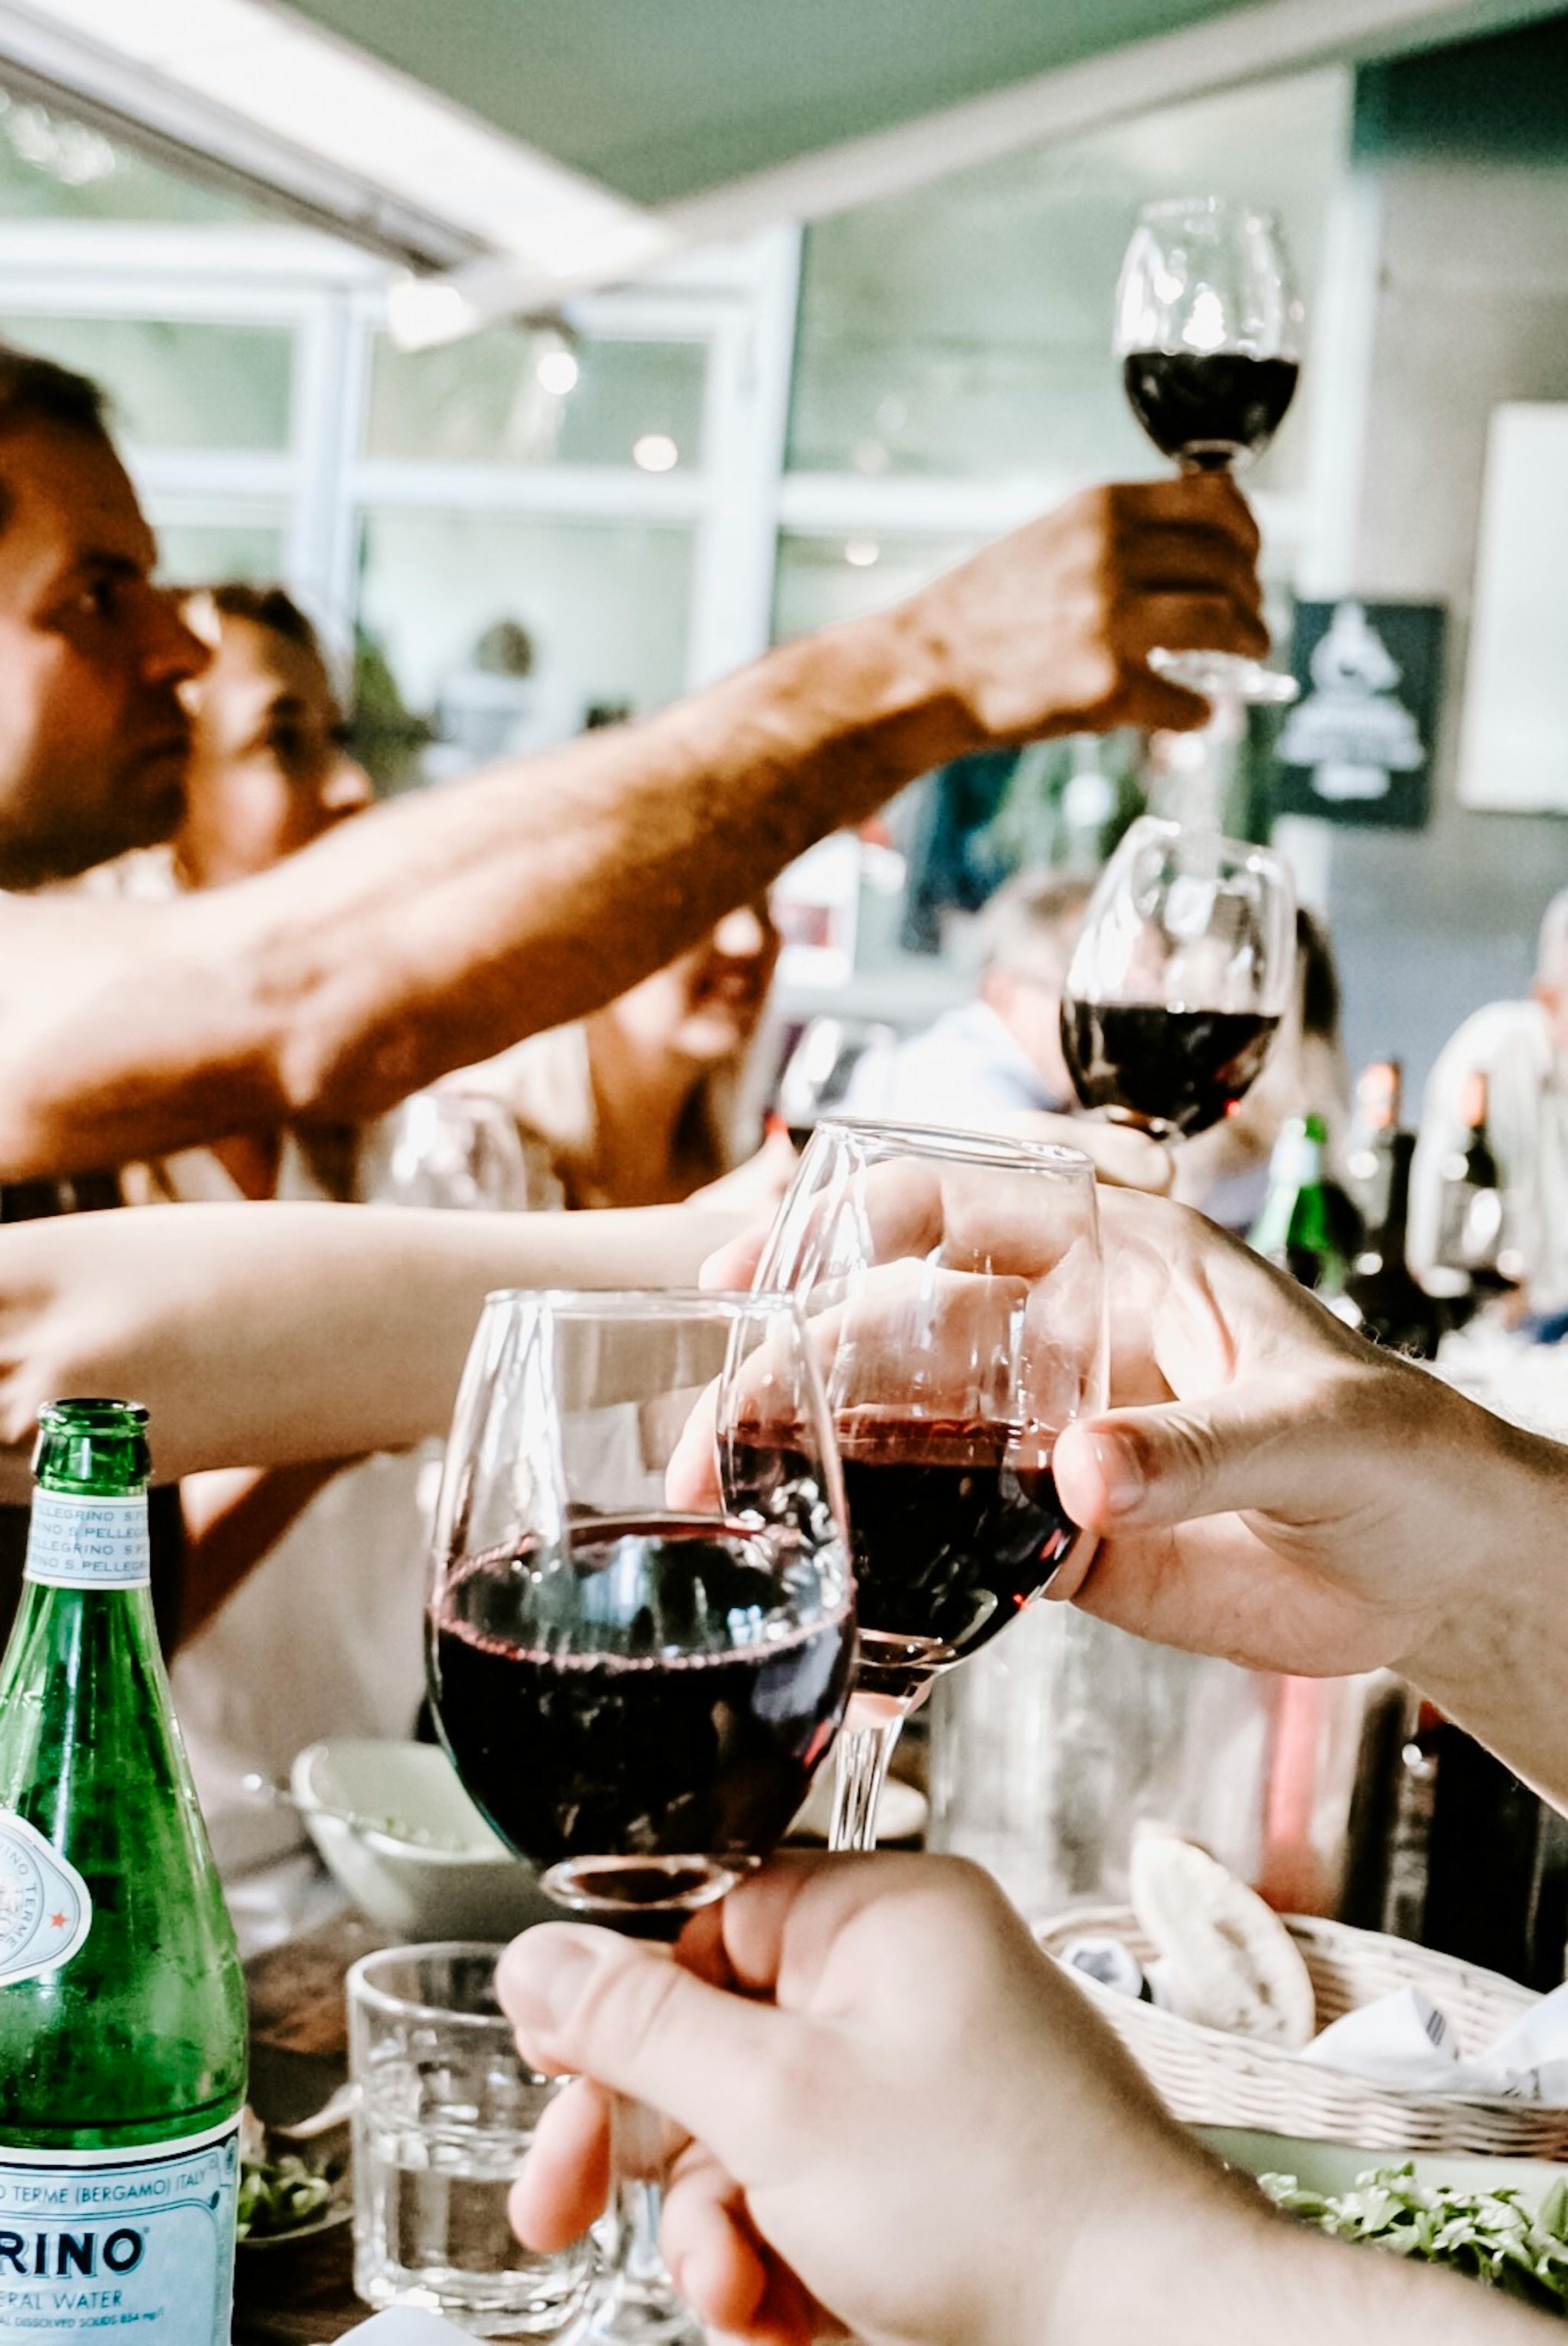 Free stock photo of birthday party, cheers, friends